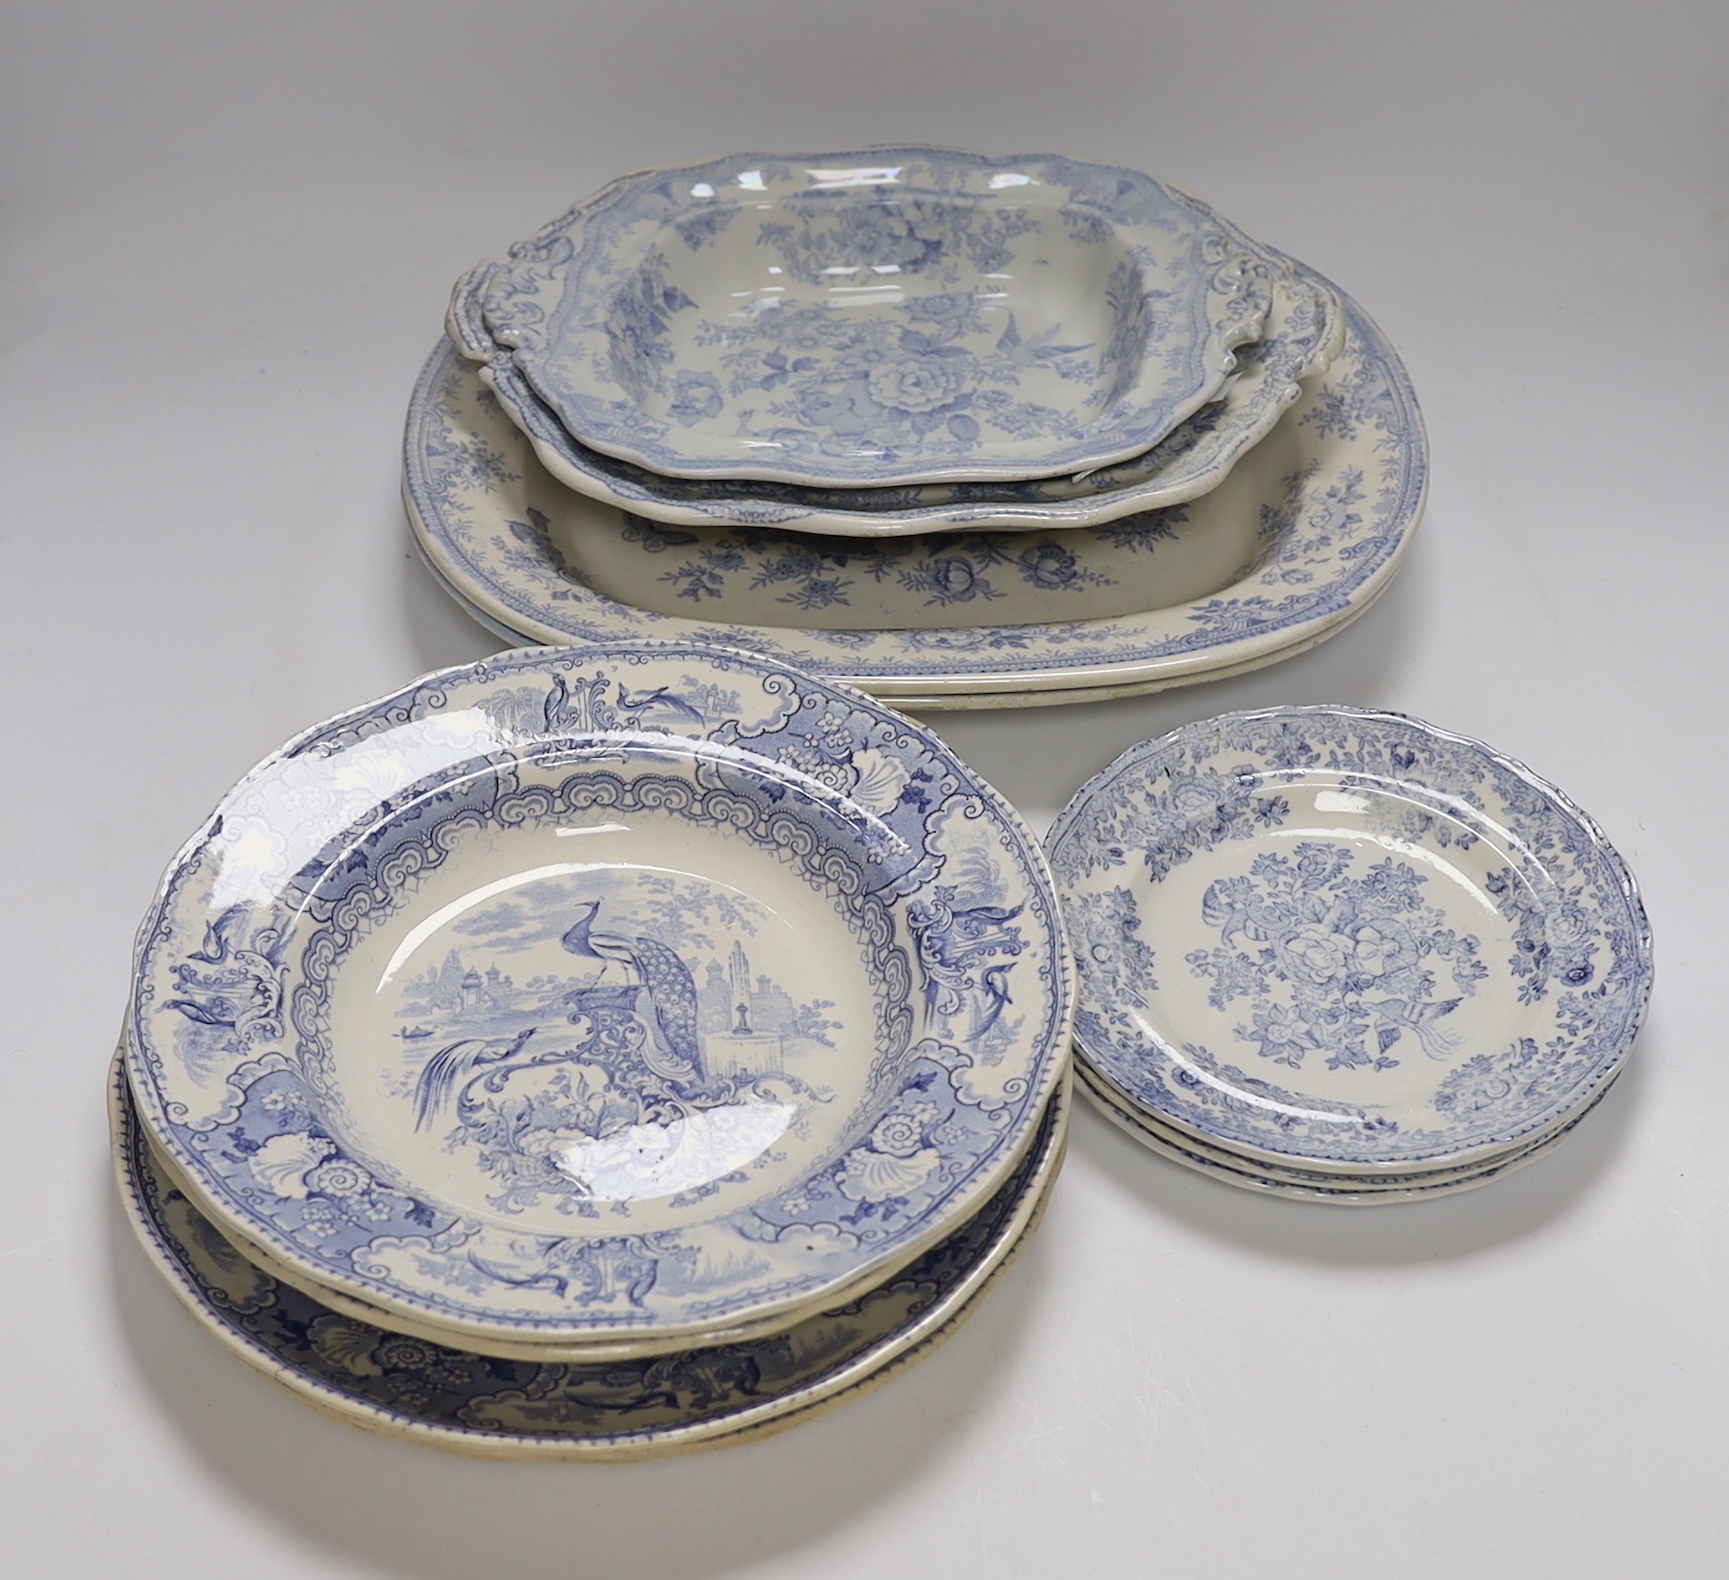 A collection of 19th century Staffordshire pottery blue and white dinner wares, (10 dishes in various sizes).                                                                                                               